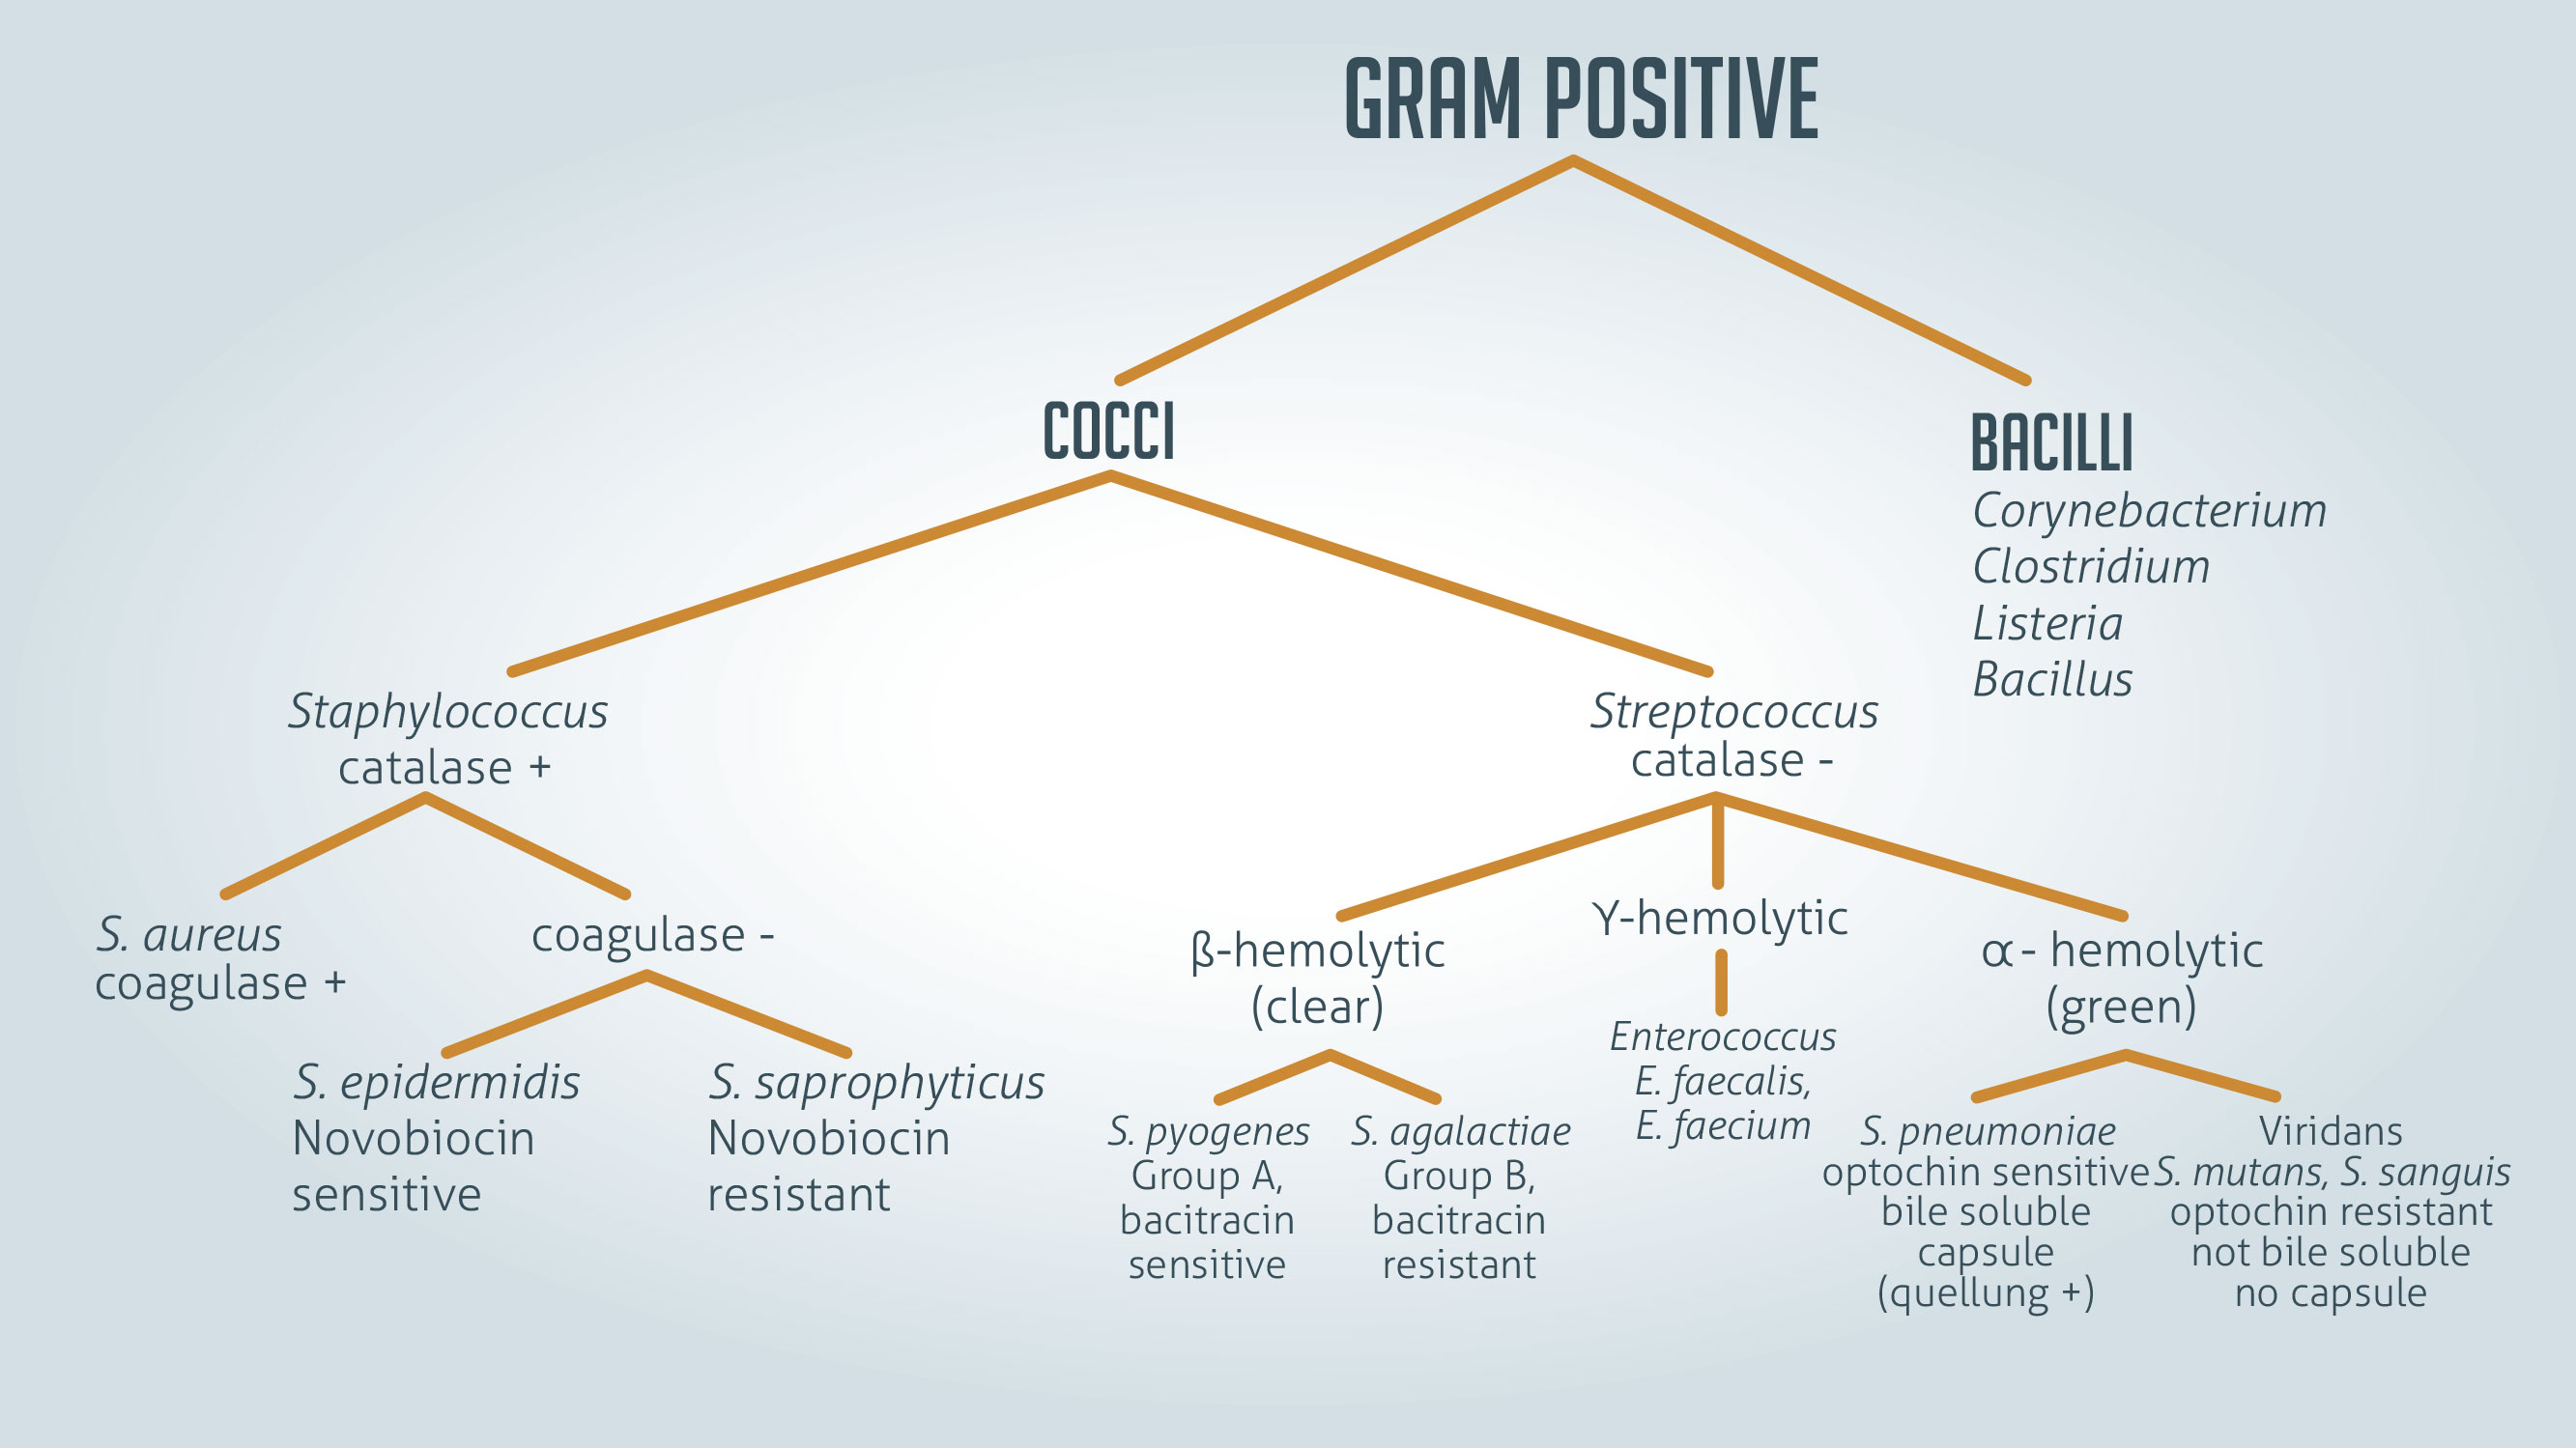 Examples of Gram positive bacteria include all staphylococci, all streptococci and some listeria species.